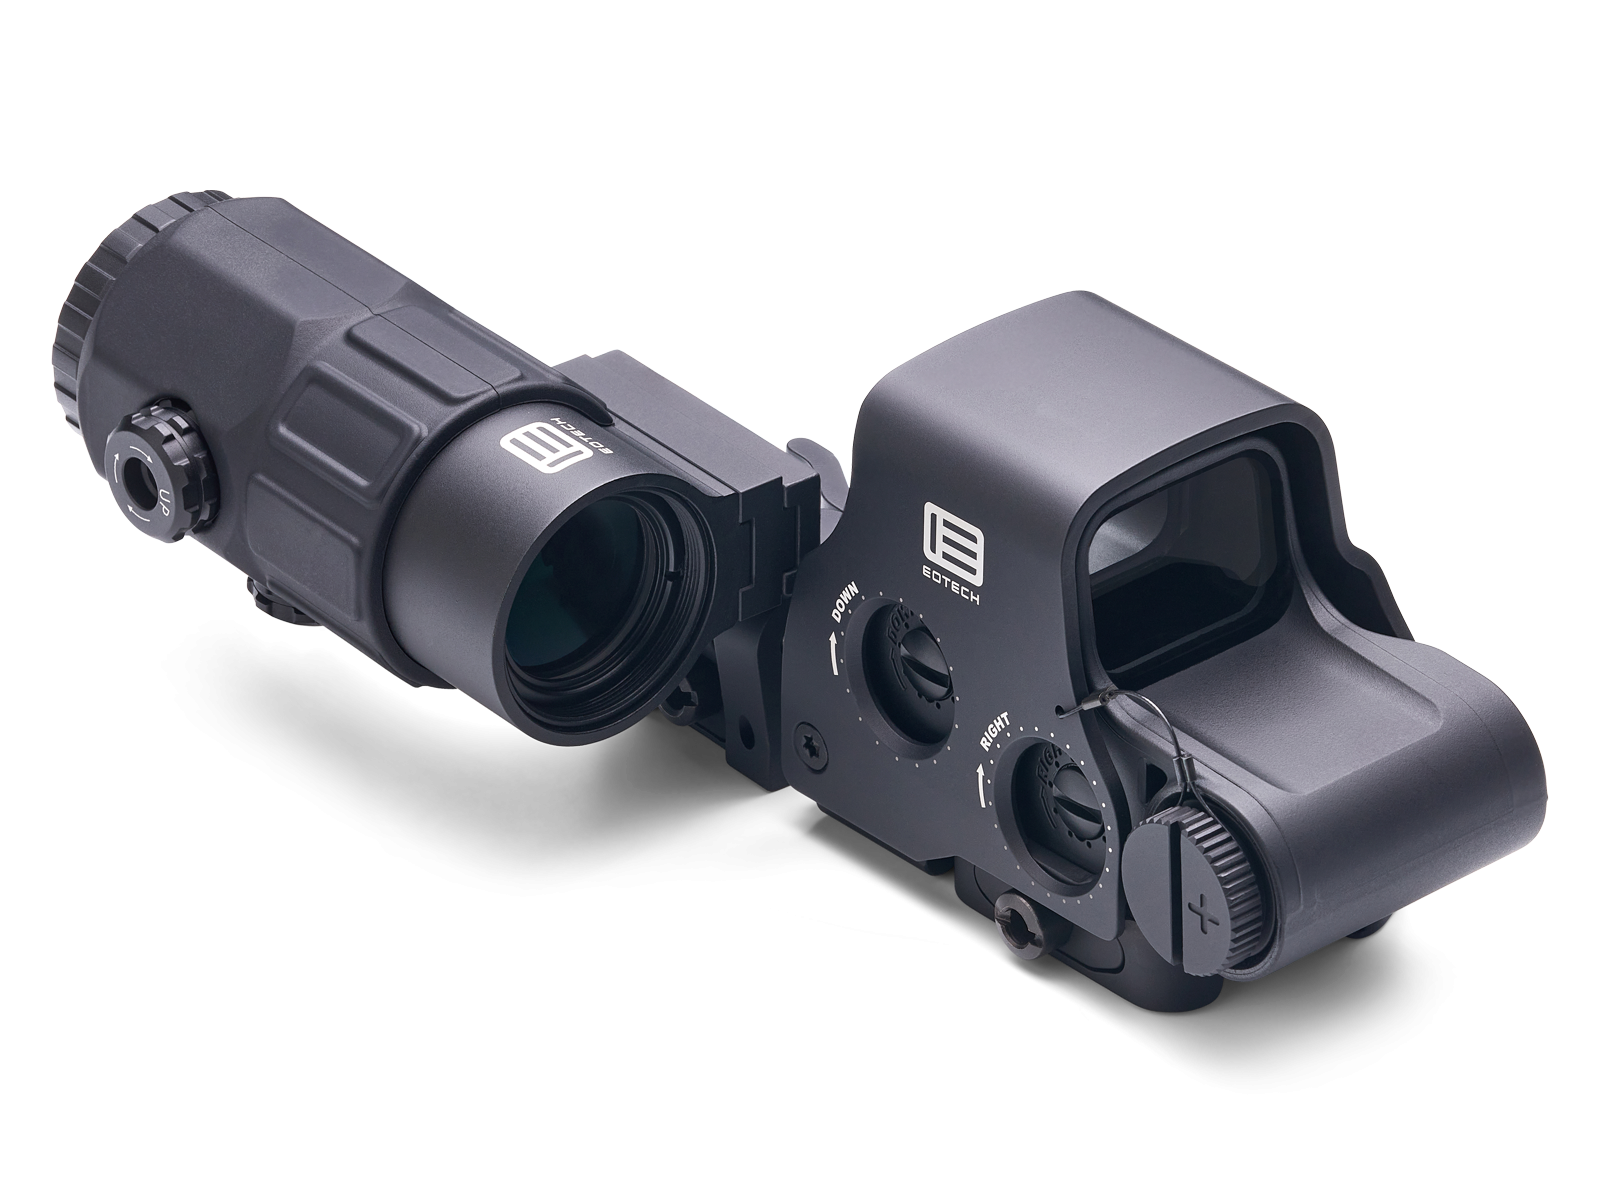 EOTech Holographic Hybrid Sight VI, EXPS3-2 Weapon Sight & G43.STS  Magnifier - High Caliber Services Corp